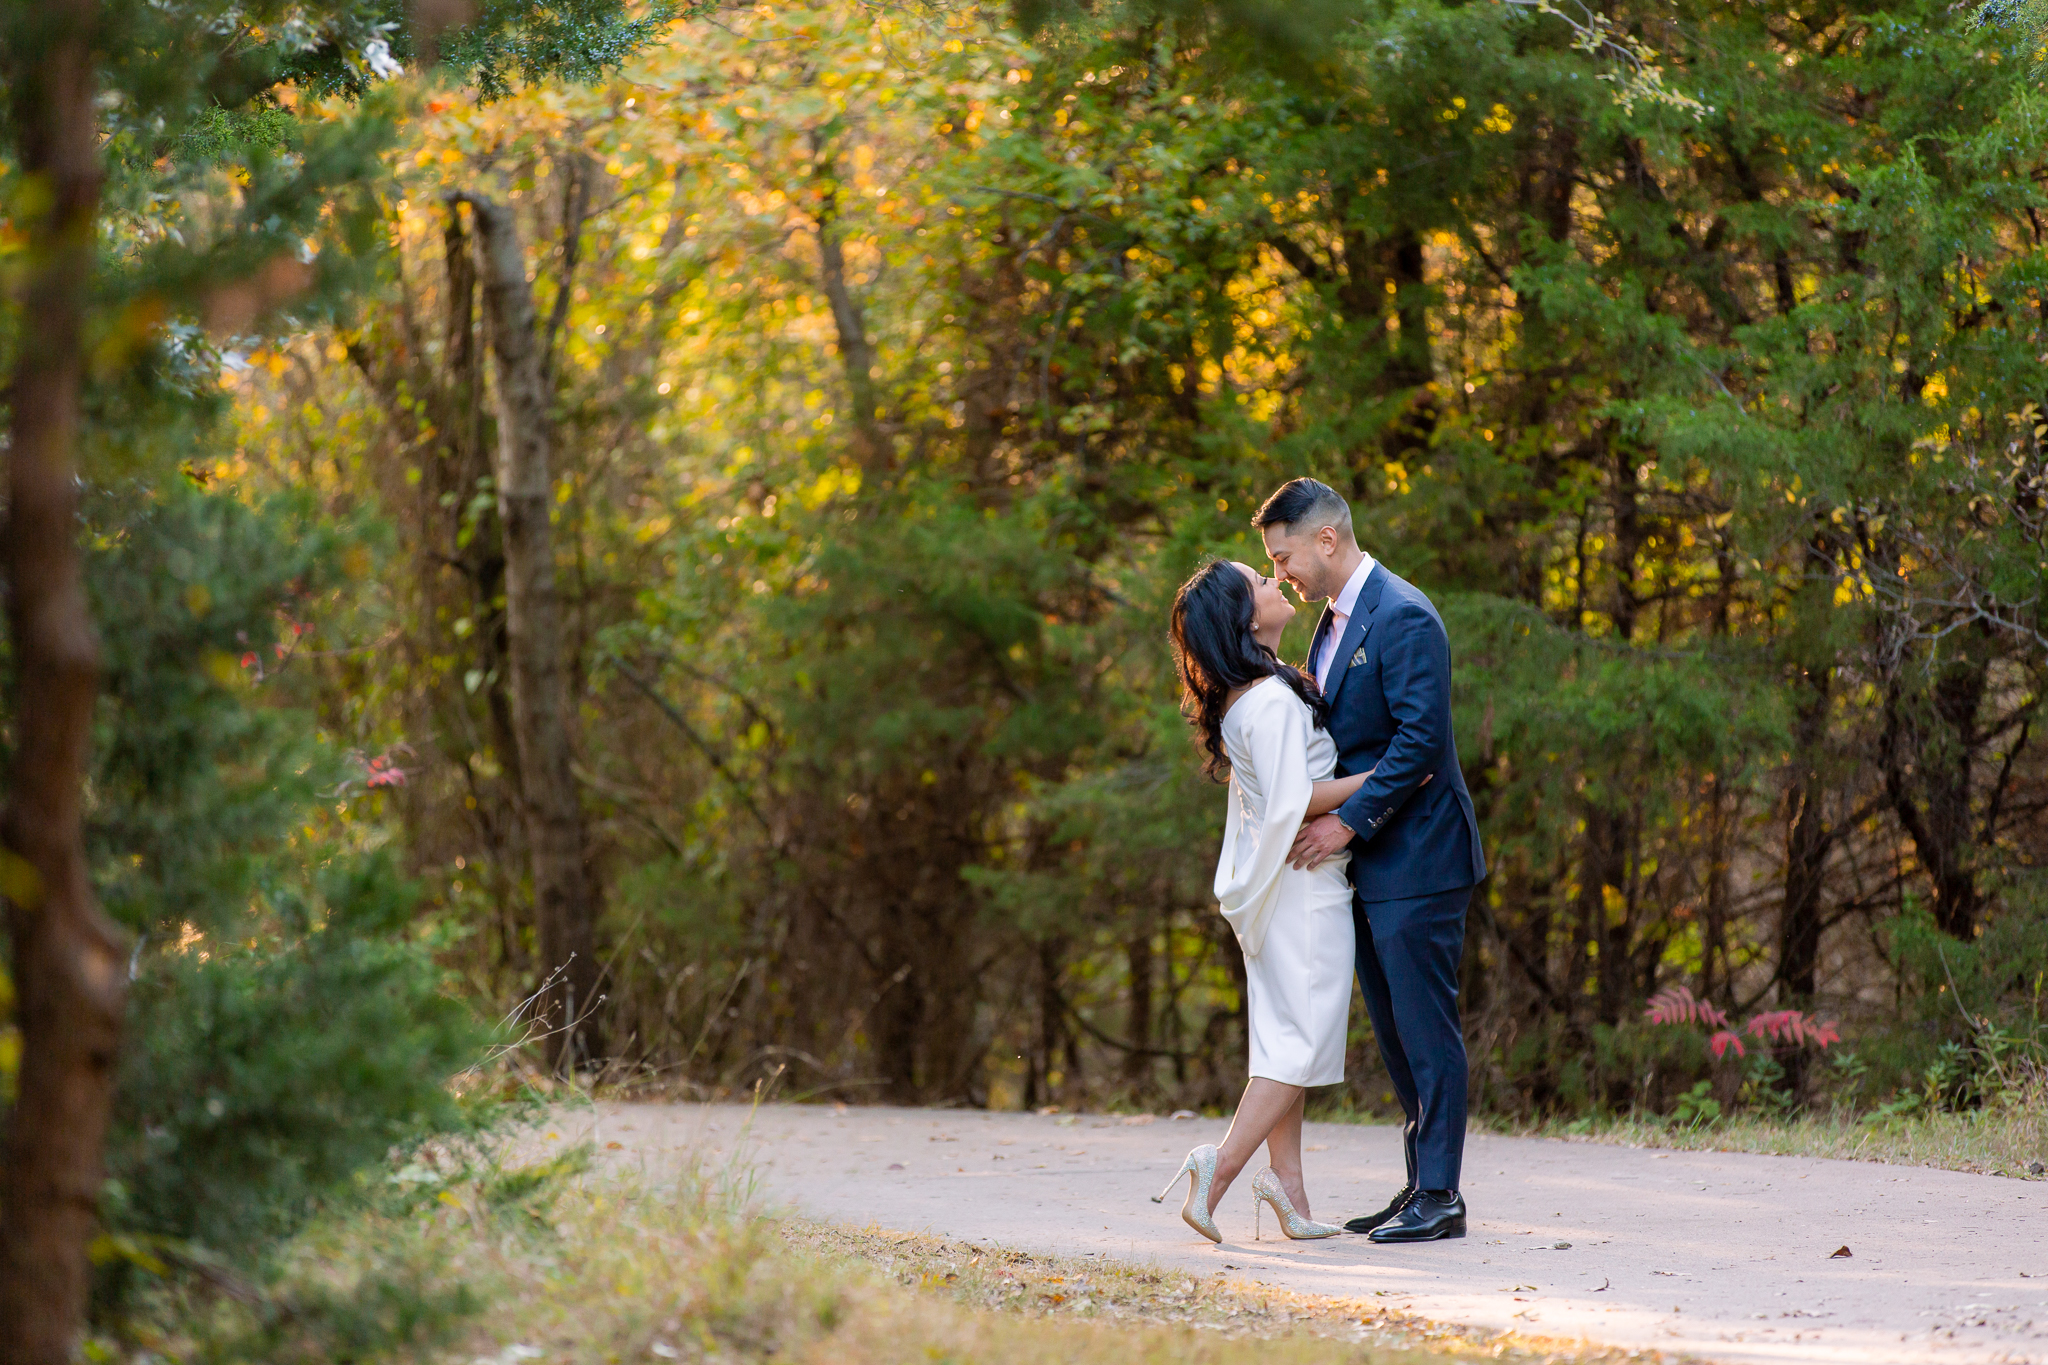 Dallas engagement session with woman leaning into the man and kissing him as her foot pops up and man leans into the woman as they stand on a path together